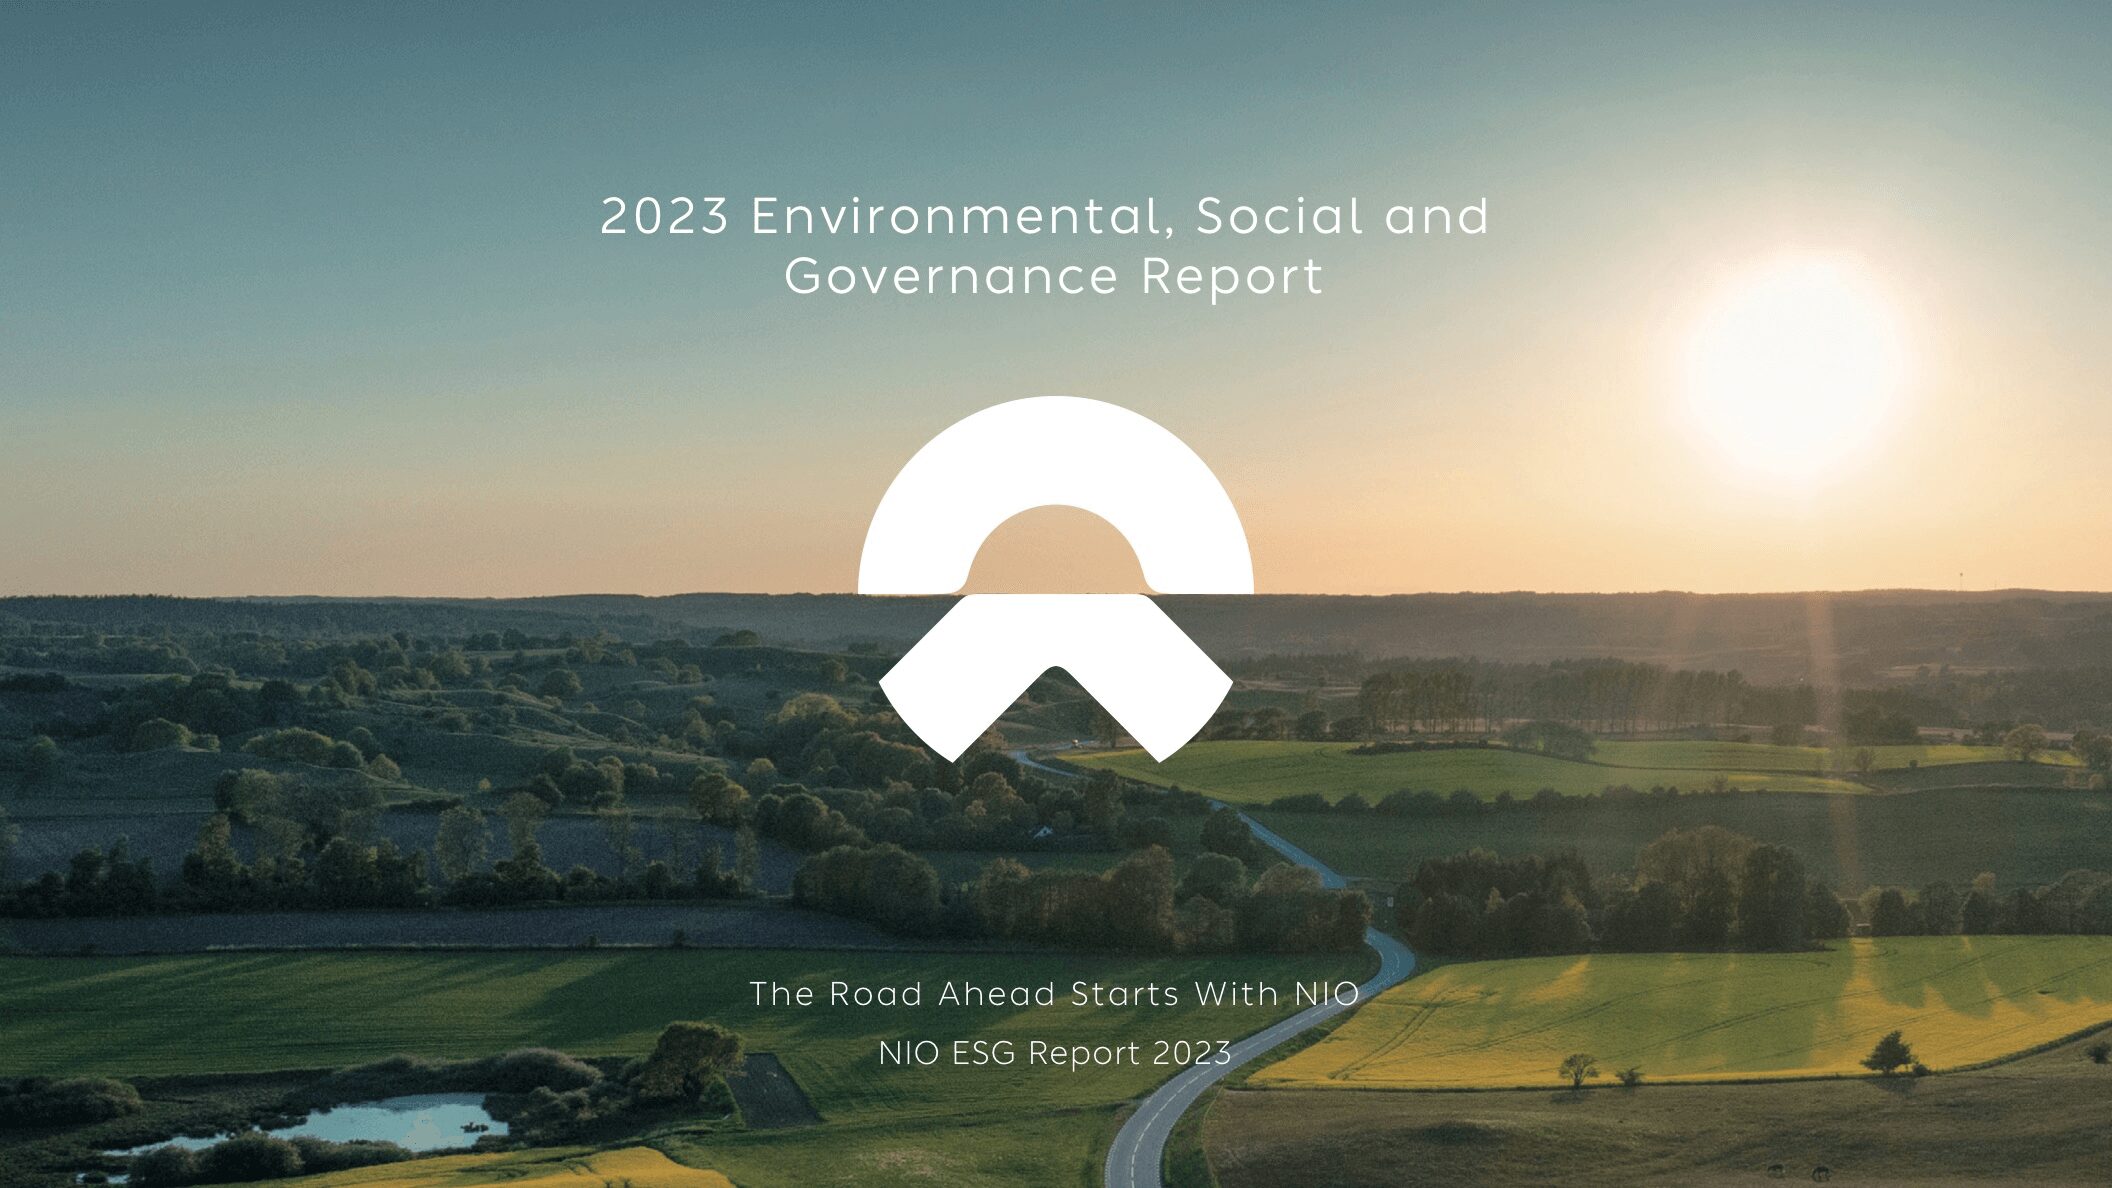 NIO's 2023 ESG Report showcases significant strides in sustainability, renewable energy, safety innovations, employee care, and community engagement, driving a greener future.